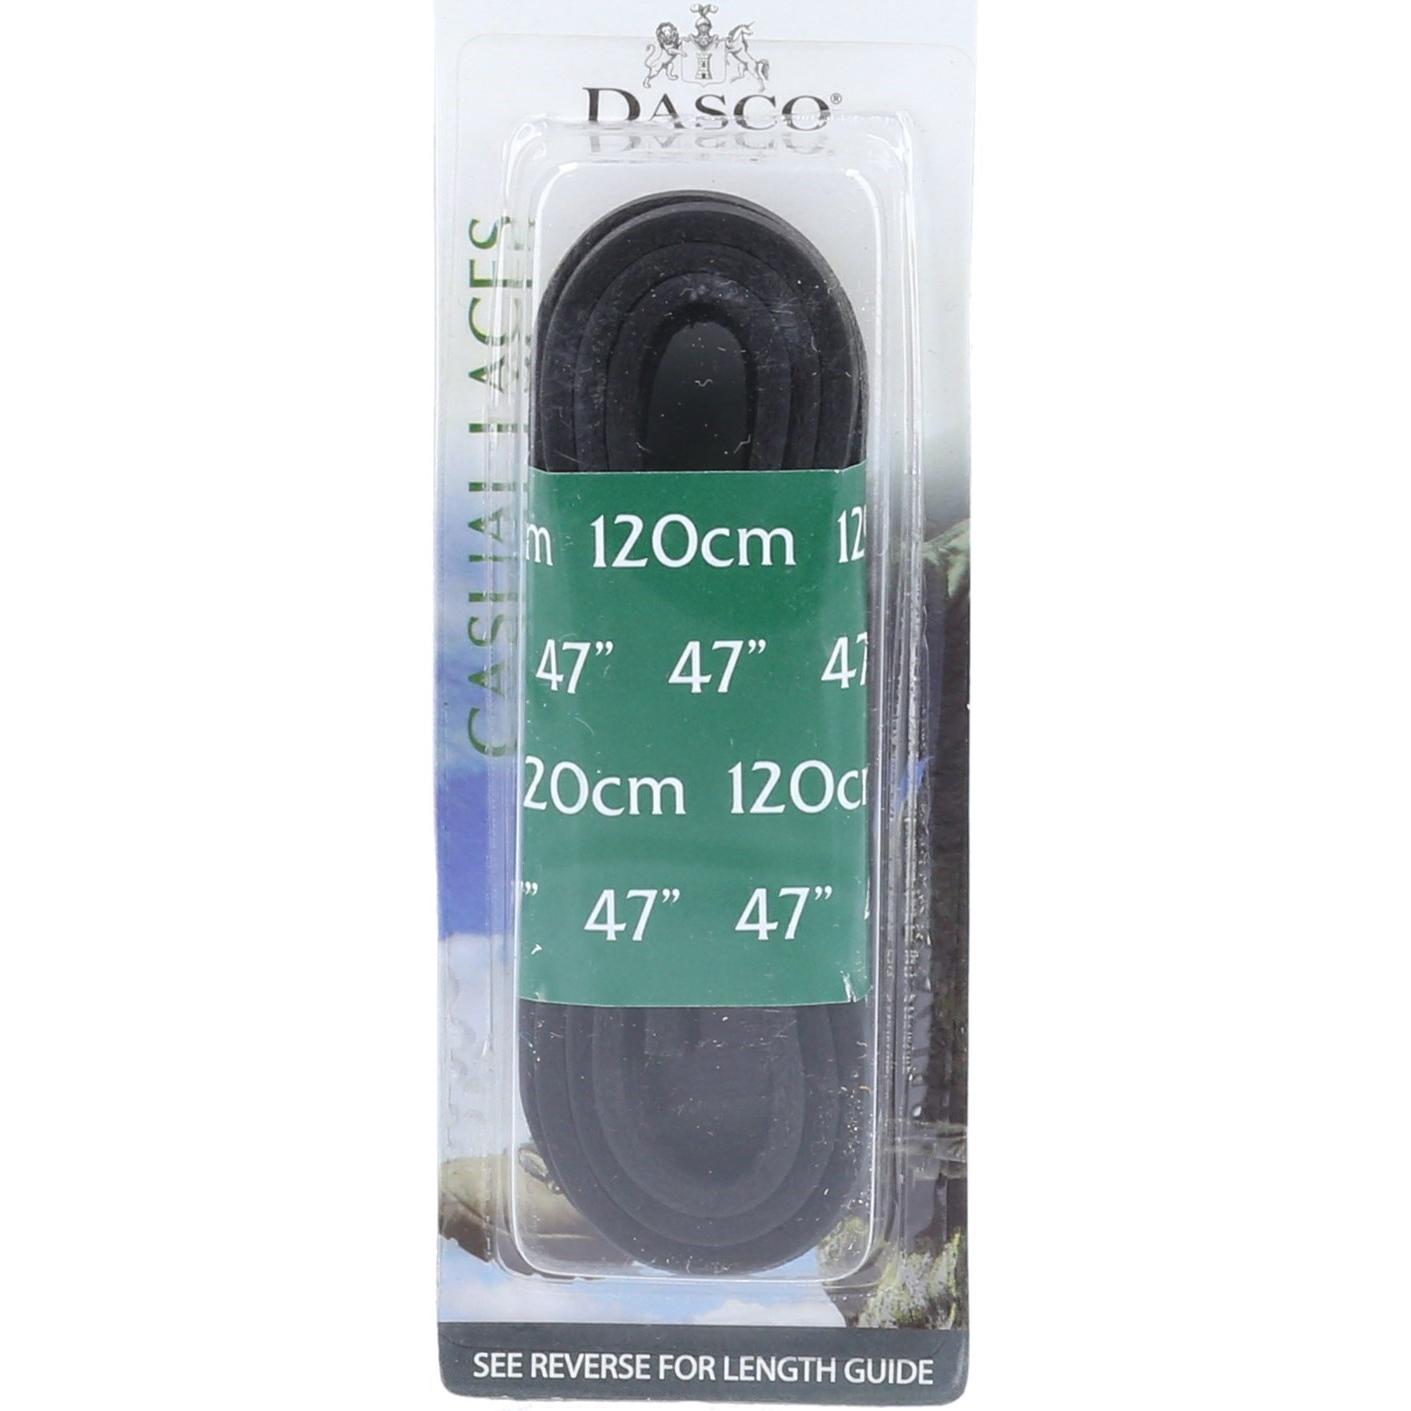 Dasco 120cm Leather Lace 6 Pack